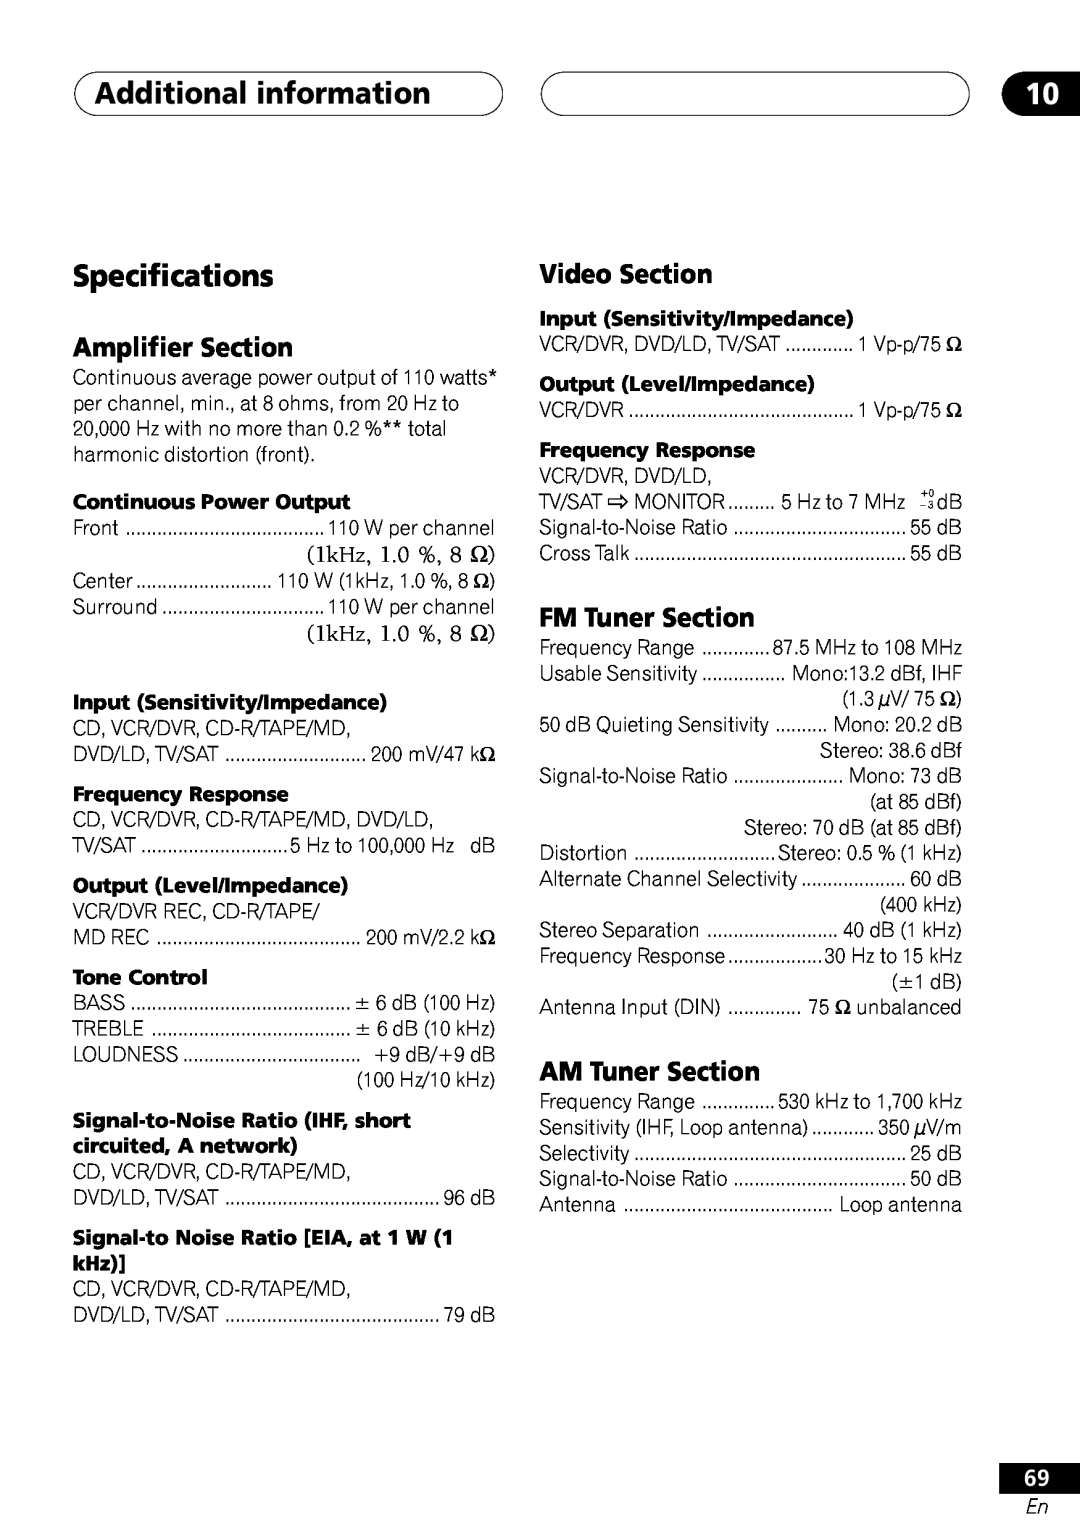 Pioneer VSX-41 Additional information Specifications, Amplifier Section, Video Section, FM Tuner Section, AM Tuner Section 